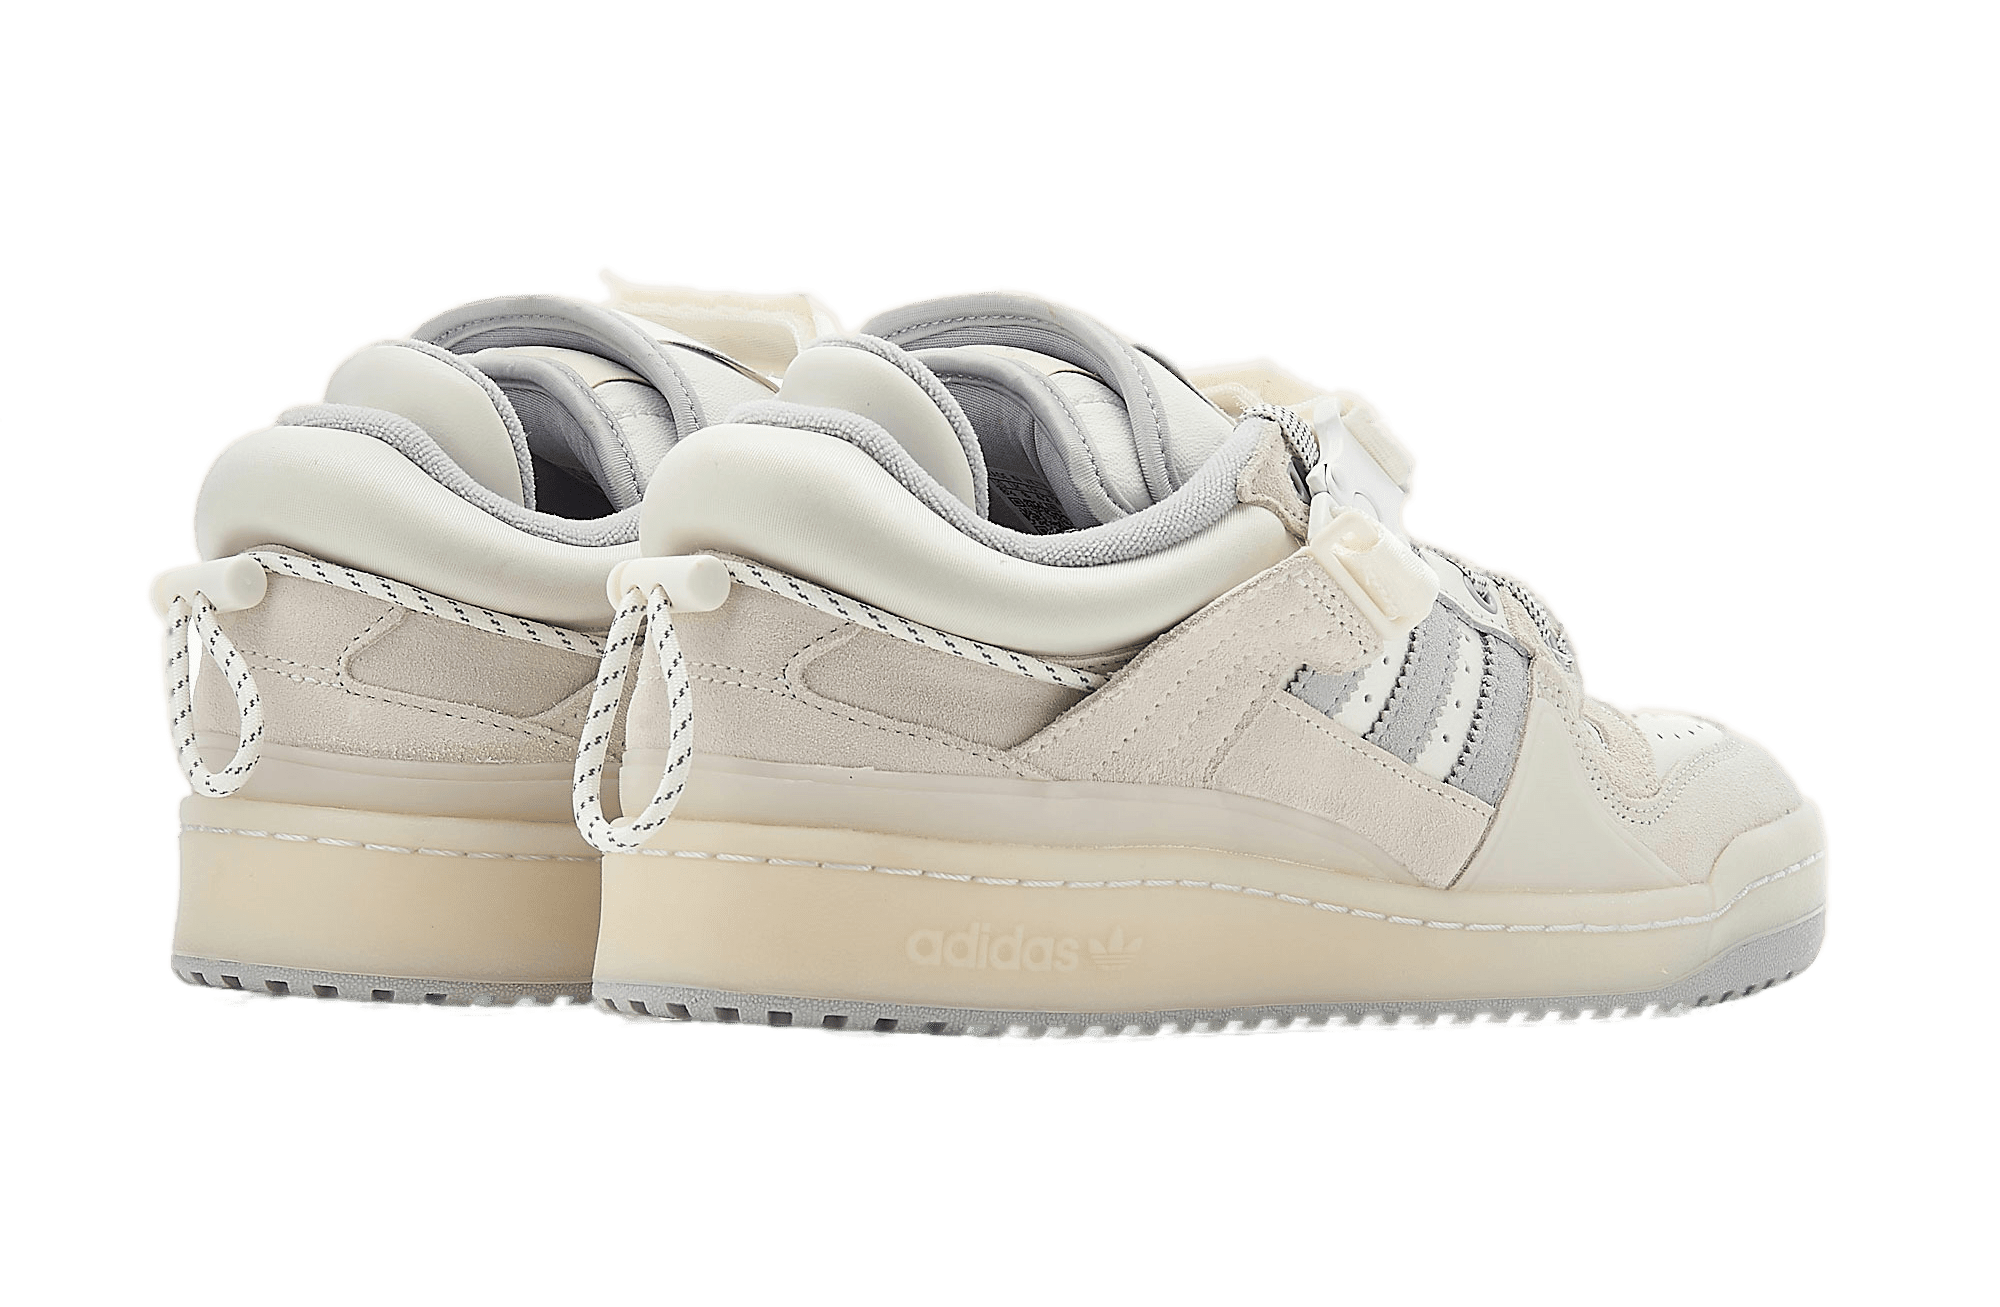 Adidas Forum Low Bad Bunny SneakCenter x – Cloud White